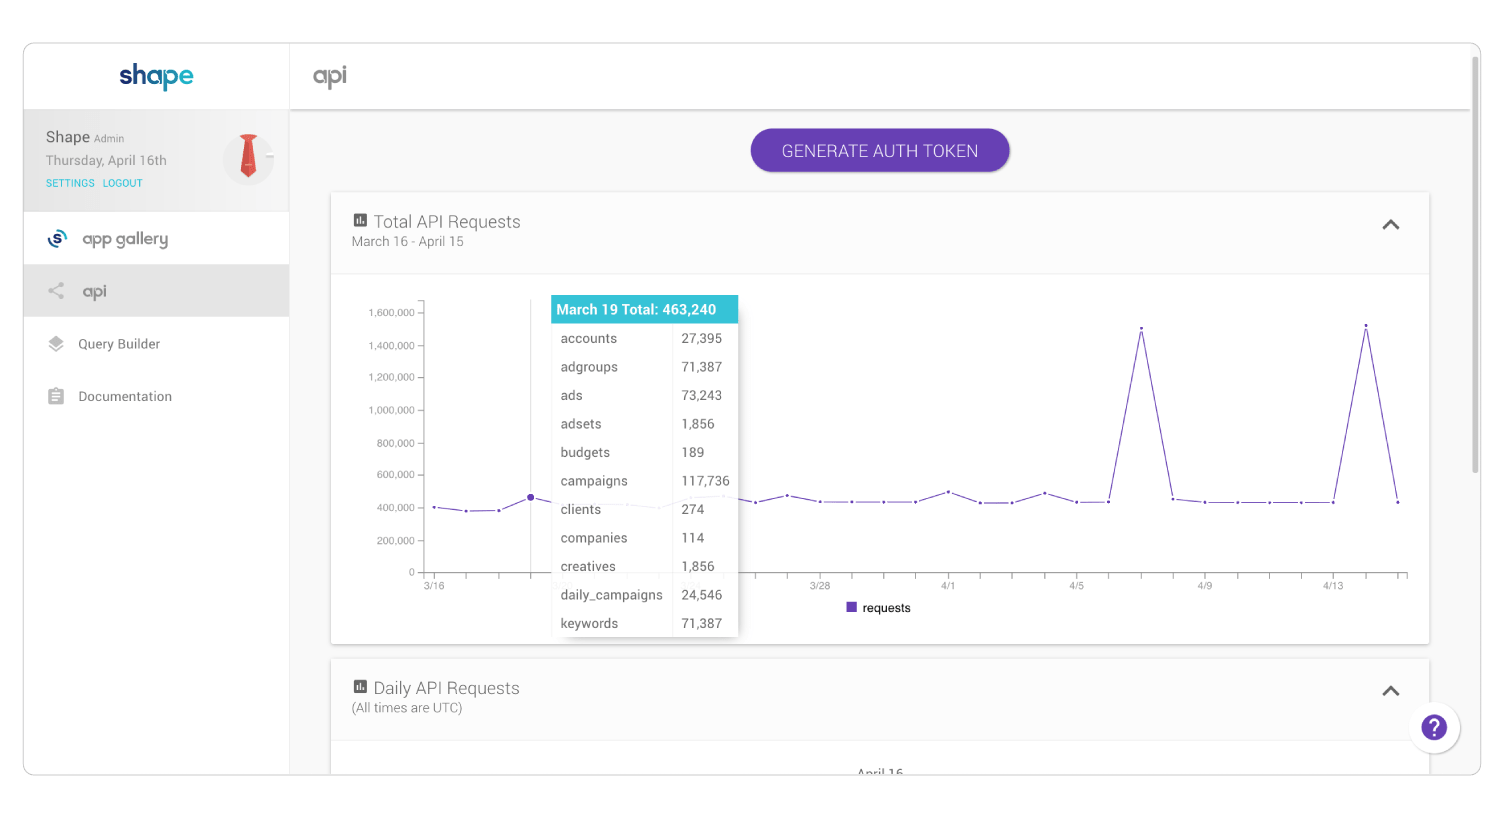 View Shape API analytics such as total API requests over time